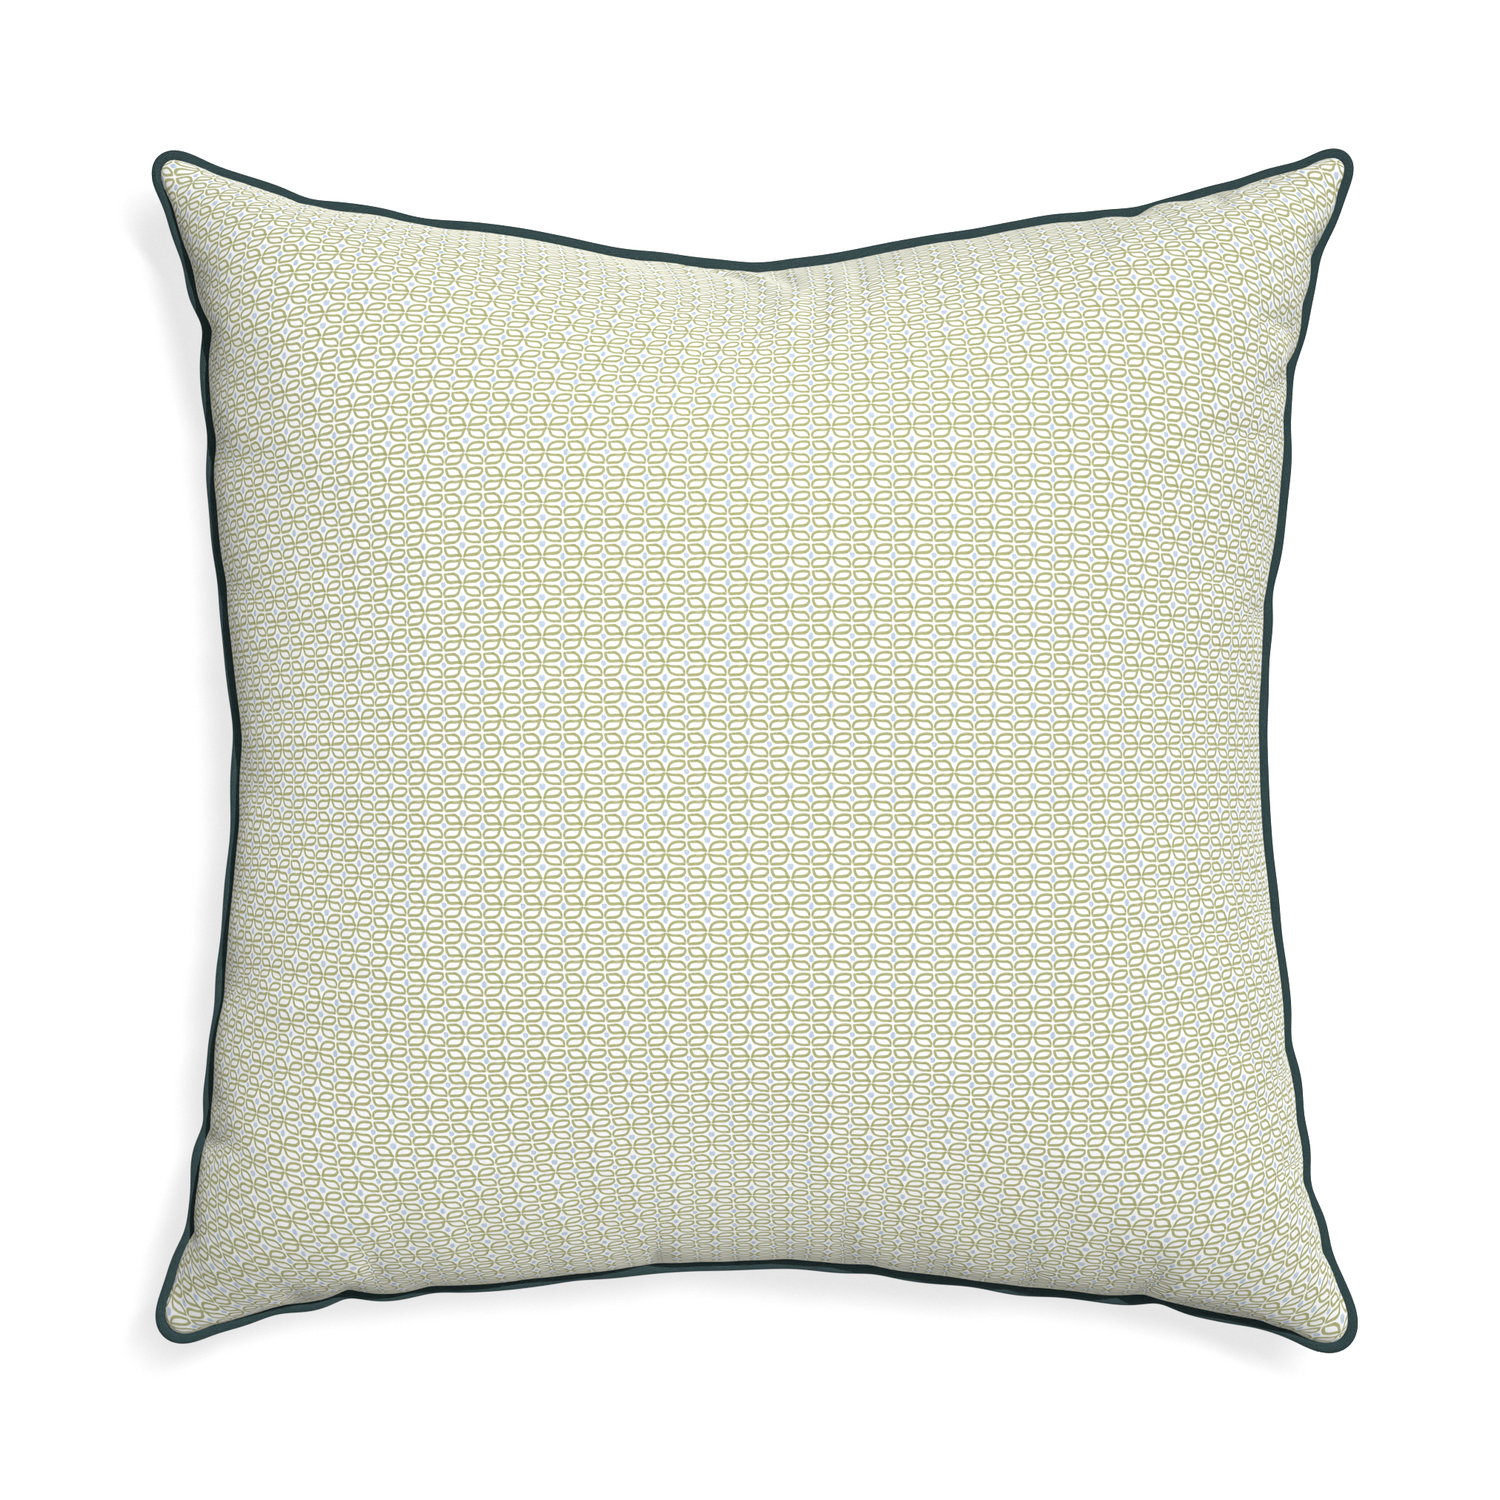 Euro-sham loomi moss custom moss green geometricpillow with p piping on white background